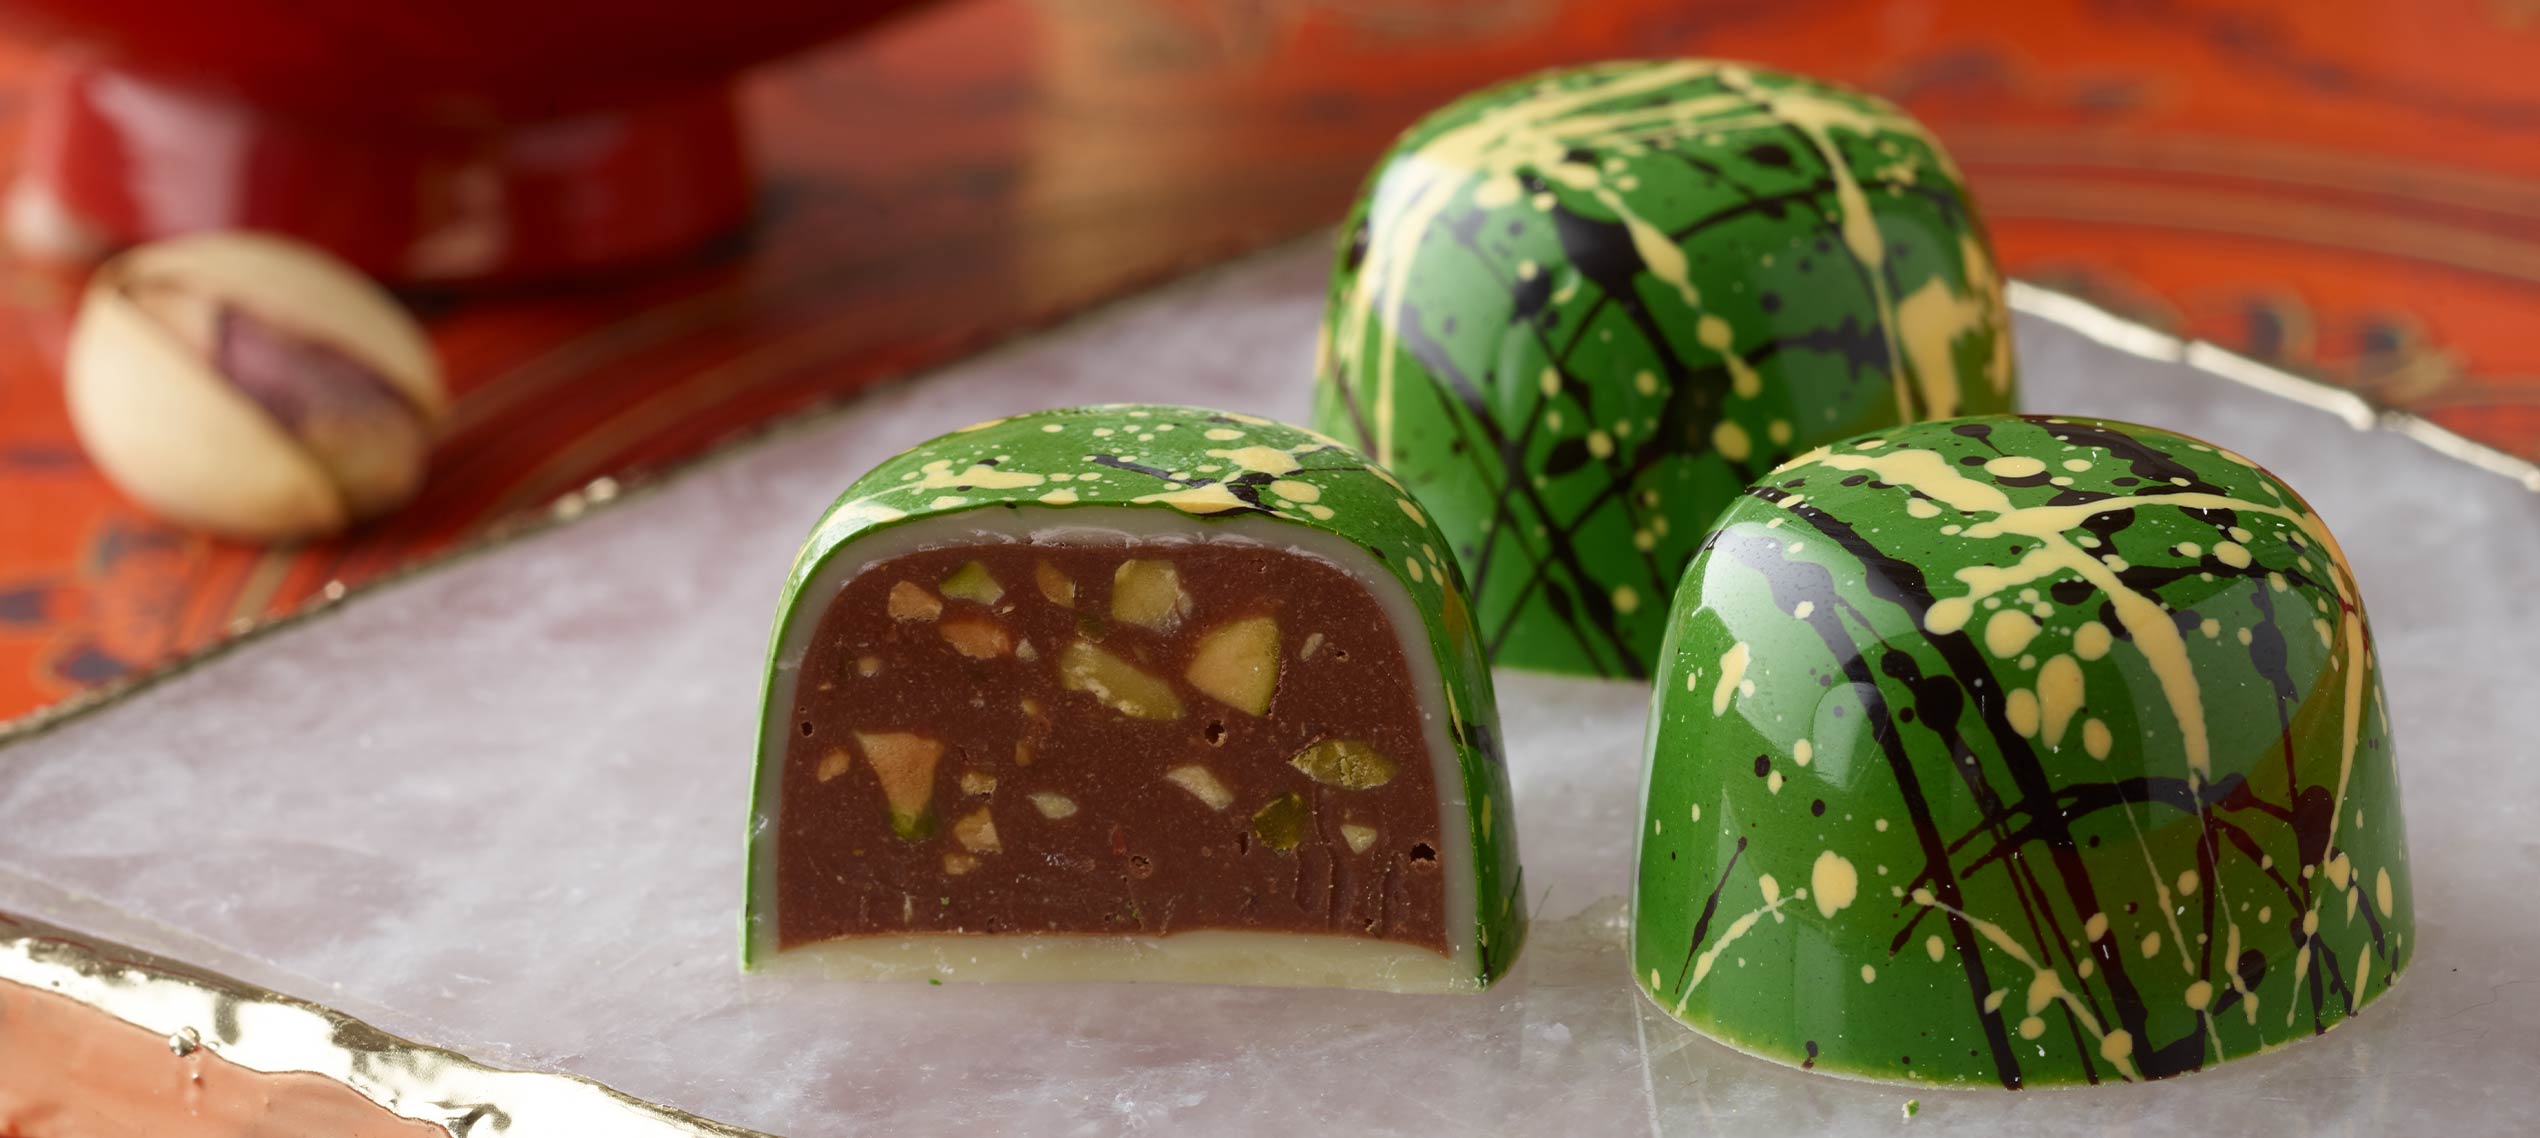 Pistachio truffle - two green with black and yellow splatters and one sliced in half - placed on a white tile with a pistachio in shell background